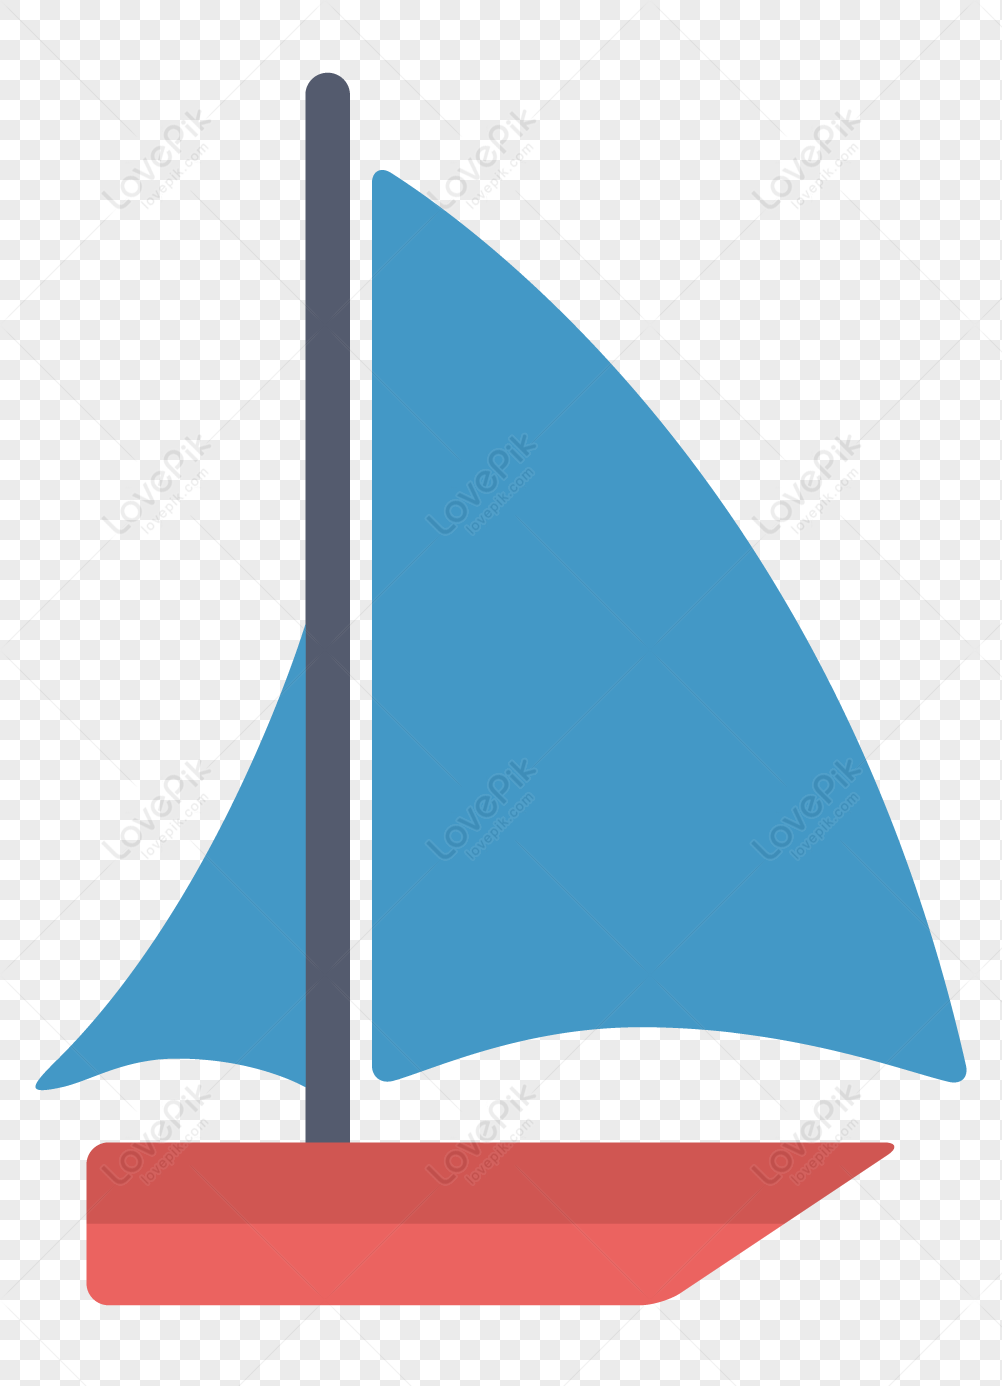 Sailboat, blue vector, light vector, blue red png image free download